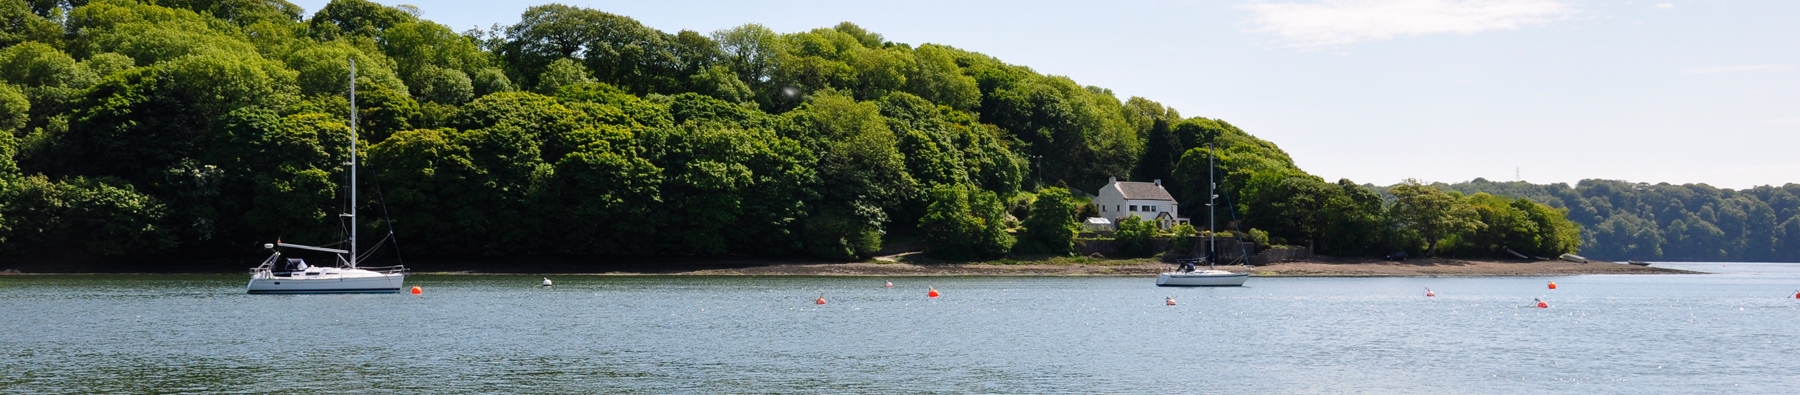 Eat, Stay, Play, and Explore at Lawrenny Quay Pembrokeshire